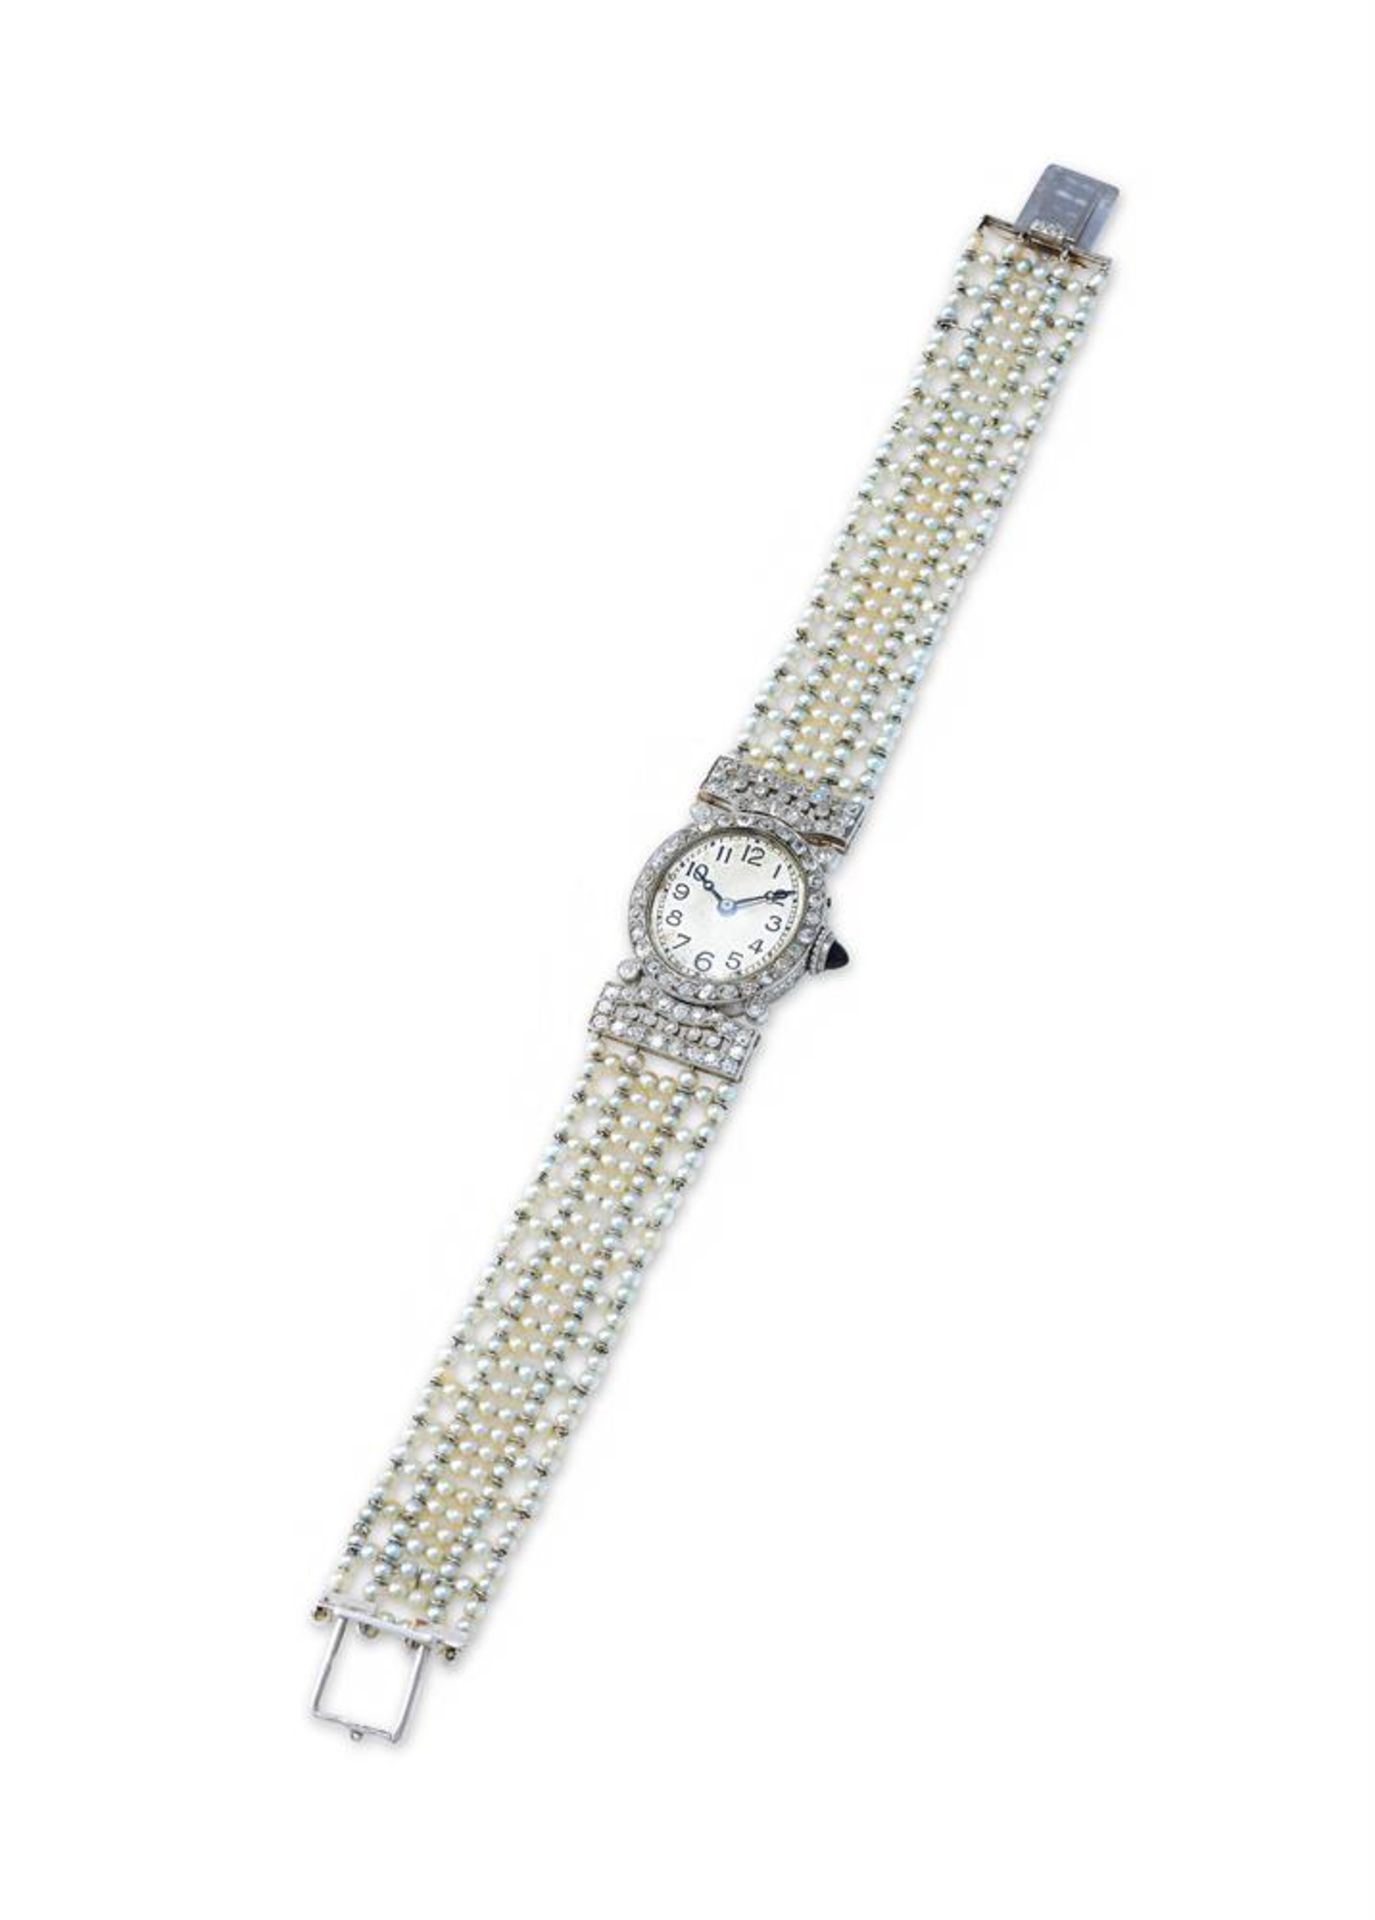 AN EARLY 20TH CENTURY DIAMOND COCKTAIL WATCH